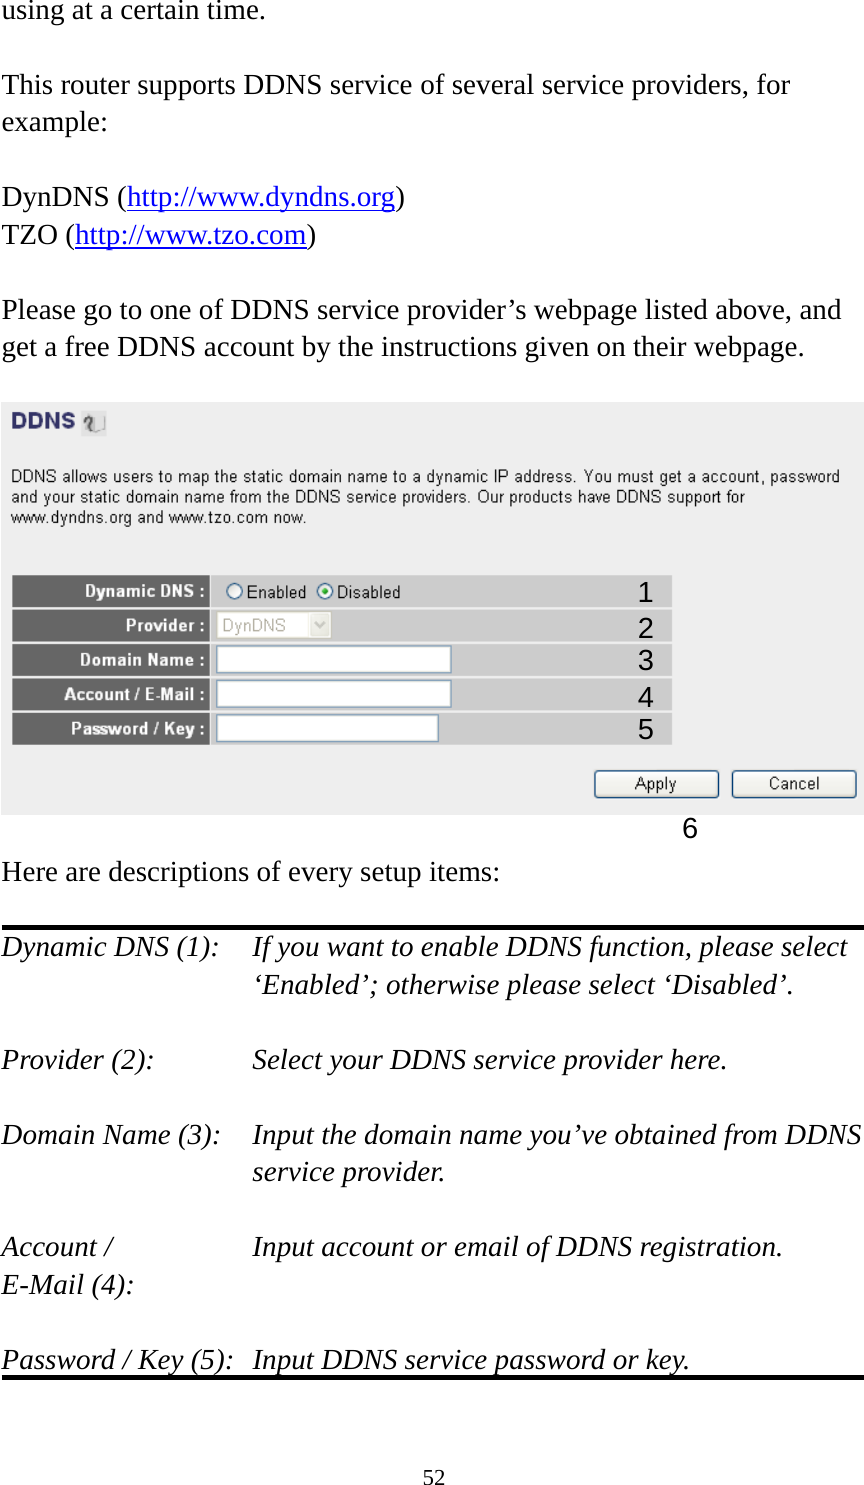 52 using at a certain time.  This router supports DDNS service of several service providers, for example:  DynDNS (http://www.dyndns.org) TZO (http://www.tzo.com)  Please go to one of DDNS service provider’s webpage listed above, and get a free DDNS account by the instructions given on their webpage.    Here are descriptions of every setup items:  Dynamic DNS (1):    If you want to enable DDNS function, please select ‘Enabled’; otherwise please select ‘Disabled’.  Provider (2):      Select your DDNS service provider here.  Domain Name (3):    Input the domain name you’ve obtained from DDNS service provider.  Account /        Input account or email of DDNS registration. E-Mail (4):    Password / Key (5):   Input DDNS service password or key.  1 2345 6 